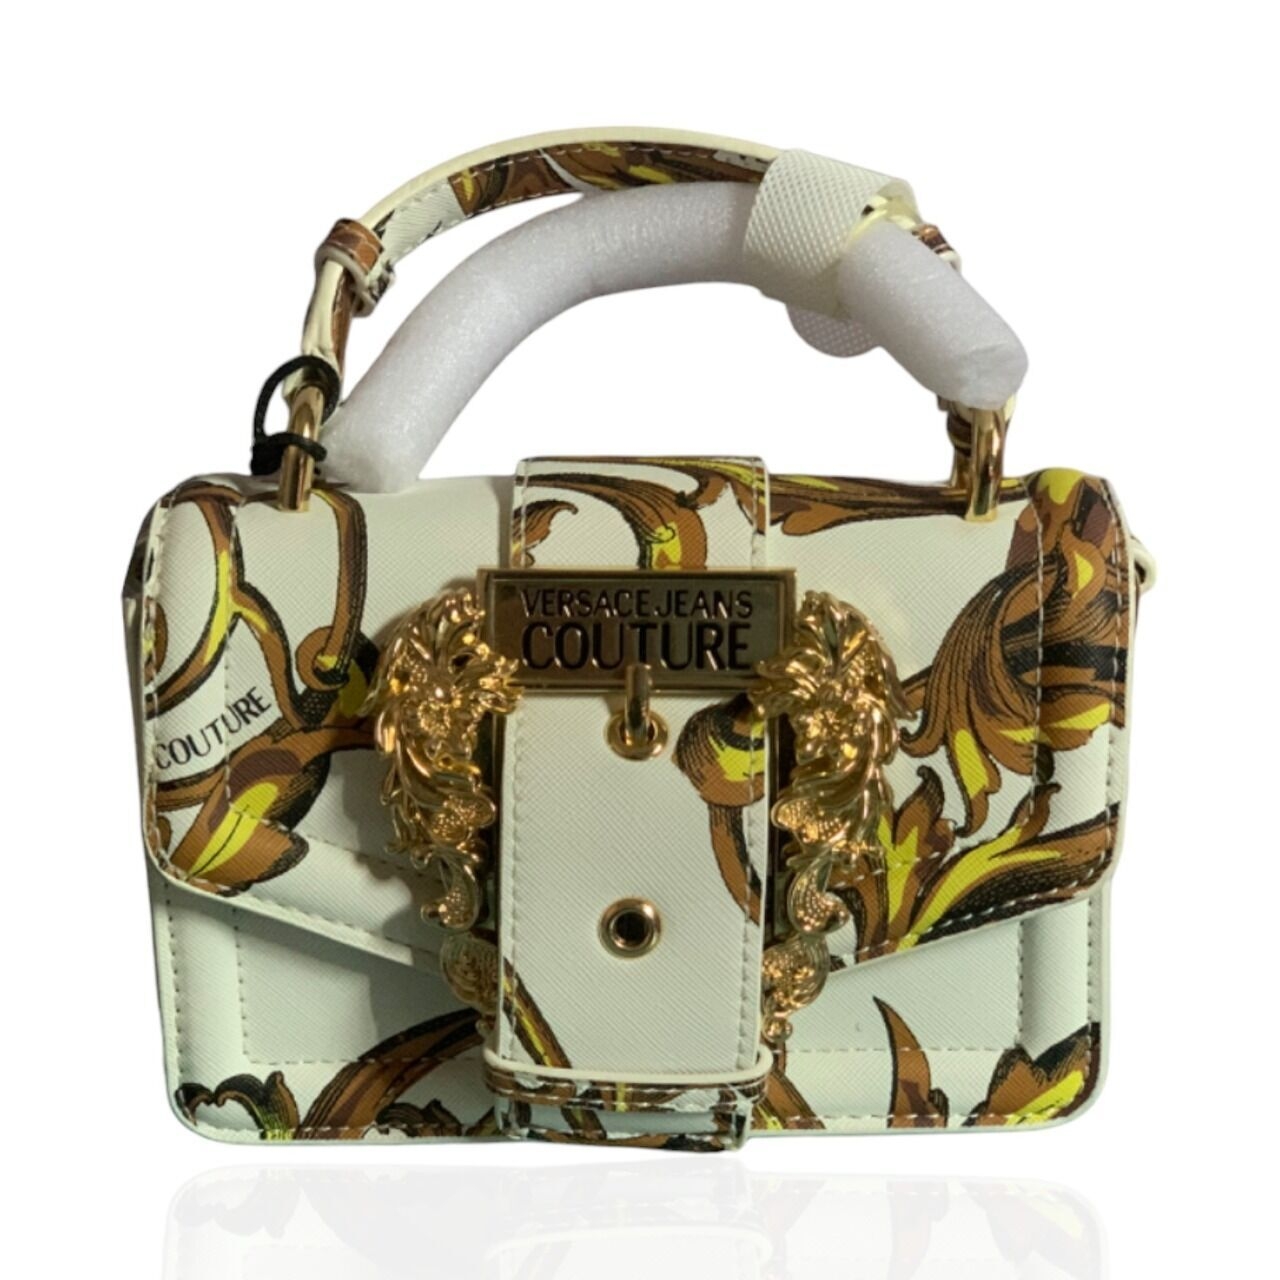 Versace Jeans Couture Buckle Top Handle Off White Sling Bag